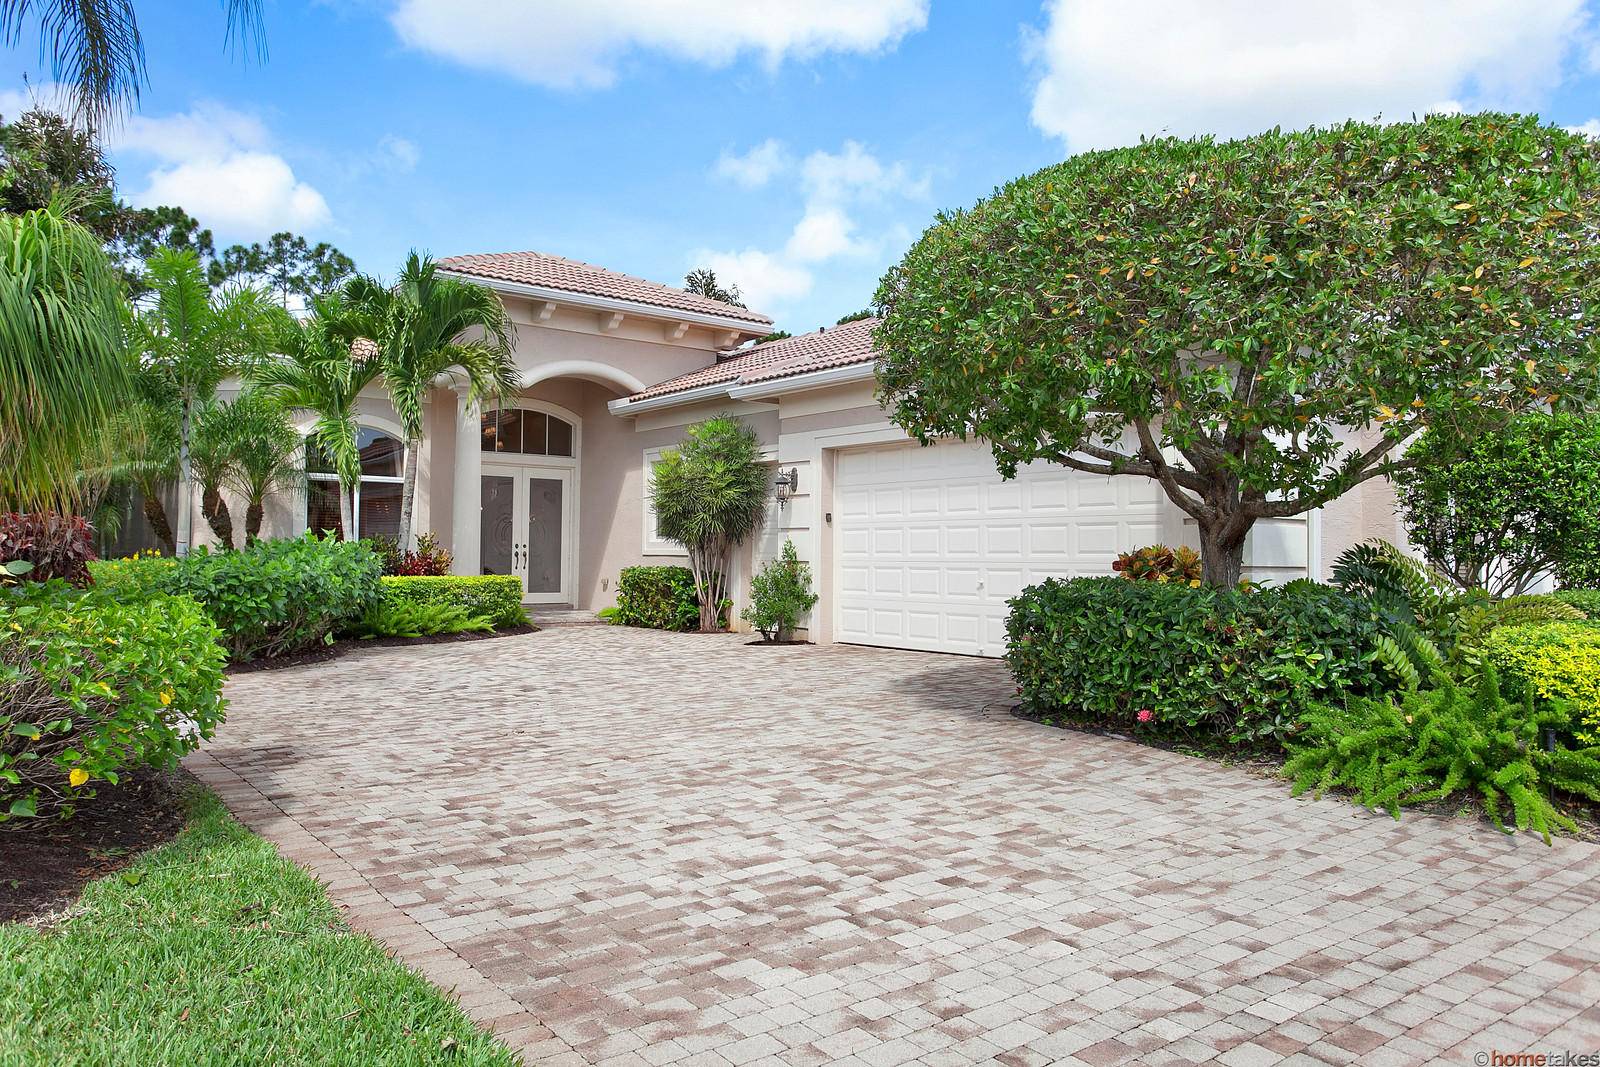 Fully furnished, turnkey, Mirasol home with FULL GOLF MEMBERSHIP included in rental price.